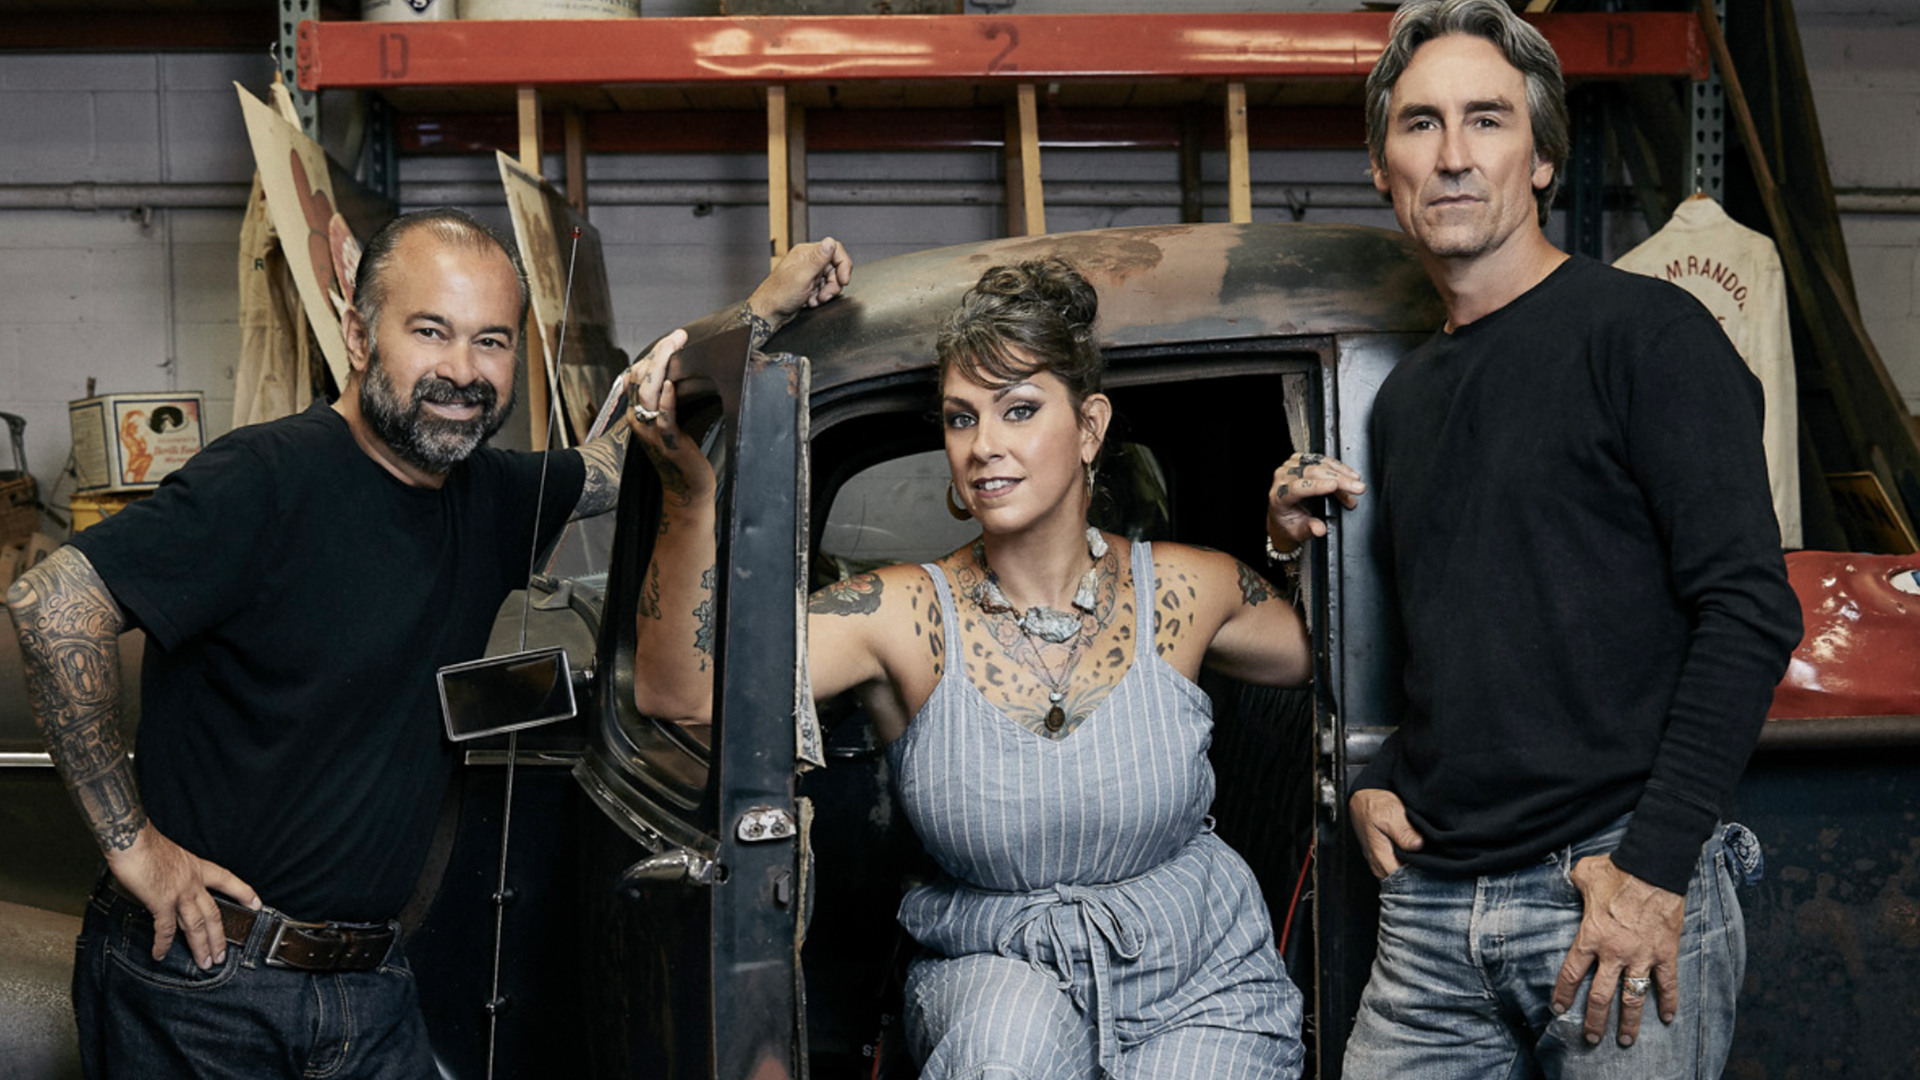 Exclusive: American Pickers’ Danielle Colby’s New Solo Project Soars Past Show’s Premiere Ratings